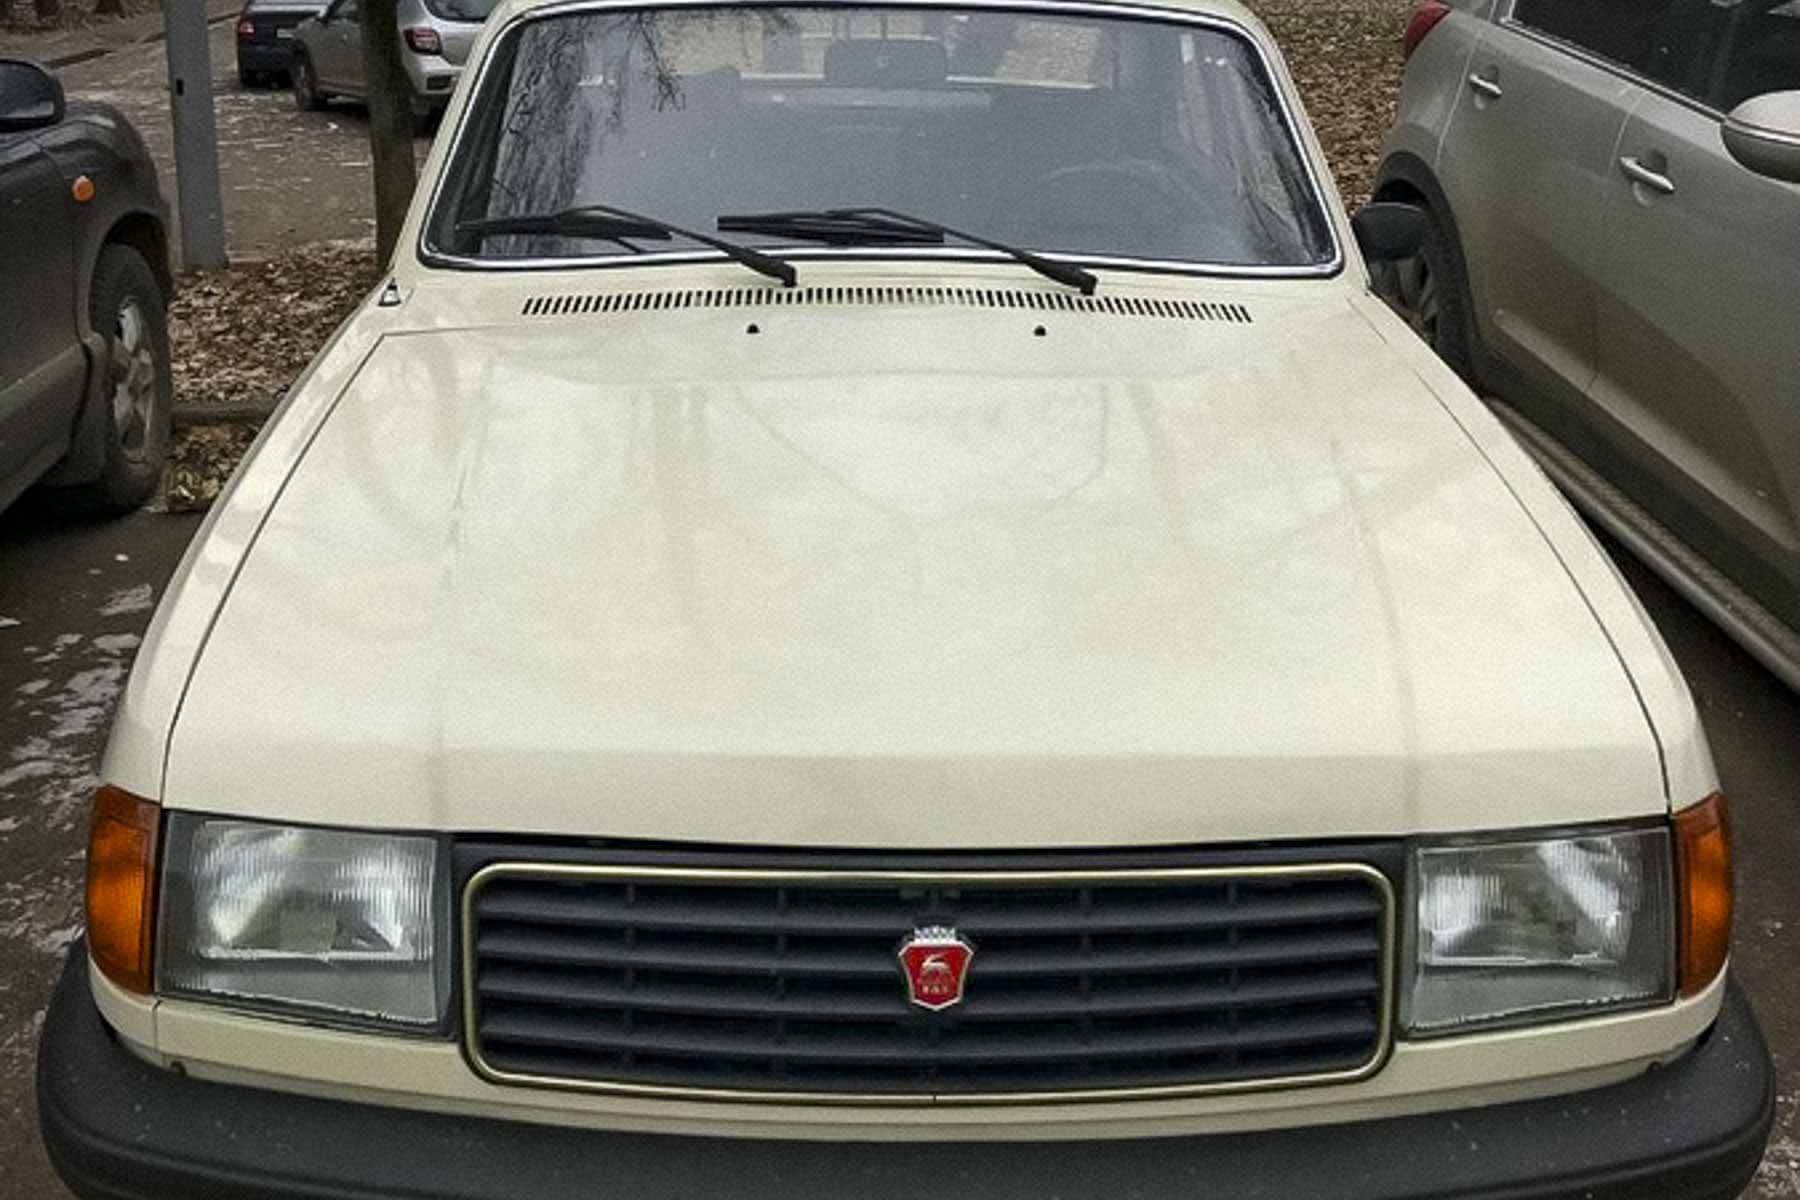 In Moscow, they are offering to buy a 1992 GAZ-31029 Volga for 750 thousand rubles